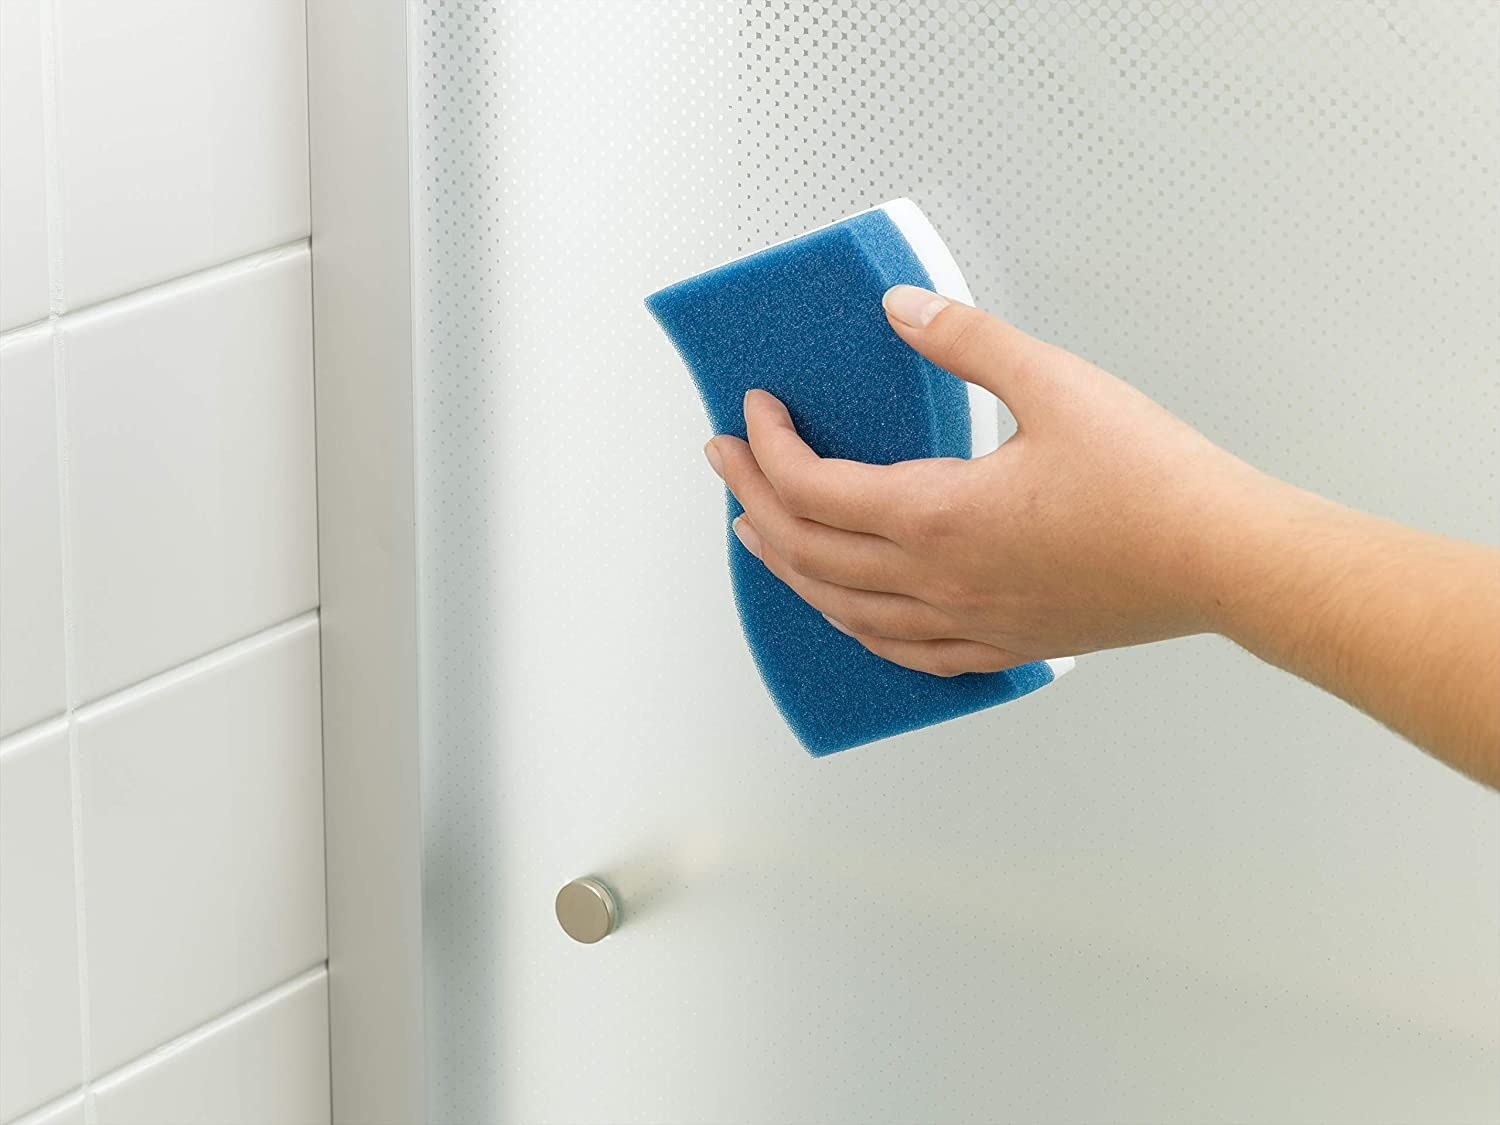 Model using the blue and white sided sponge to clean a shower door 